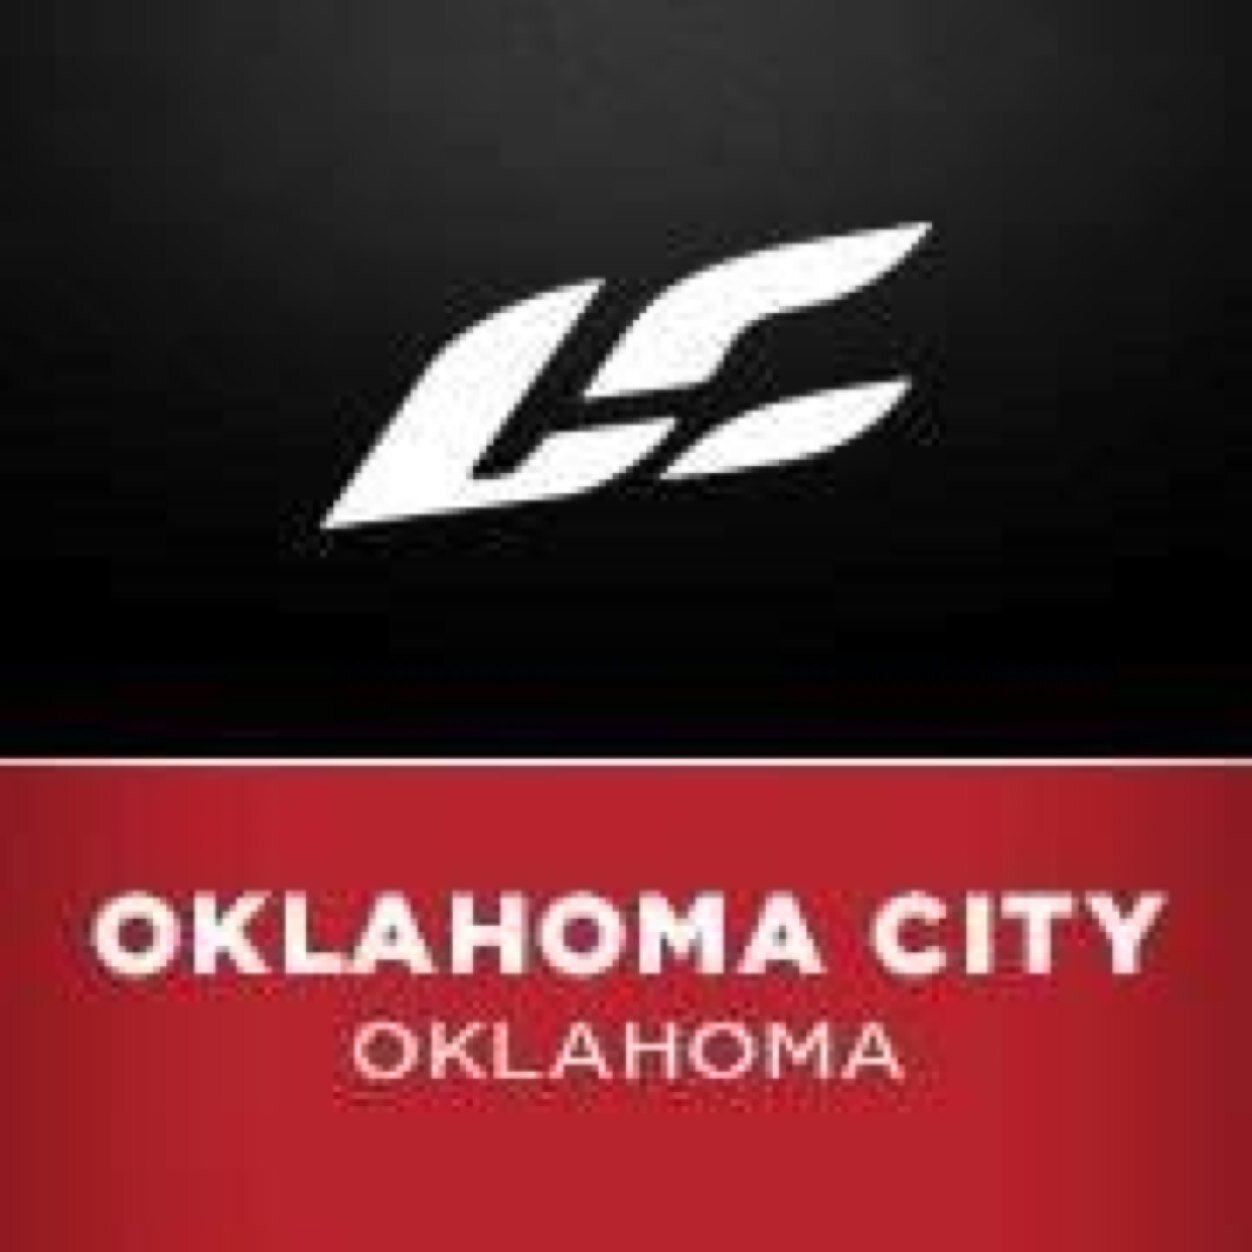 The Oklahoma City Campus of https://t.co/zK2xyL0fnO